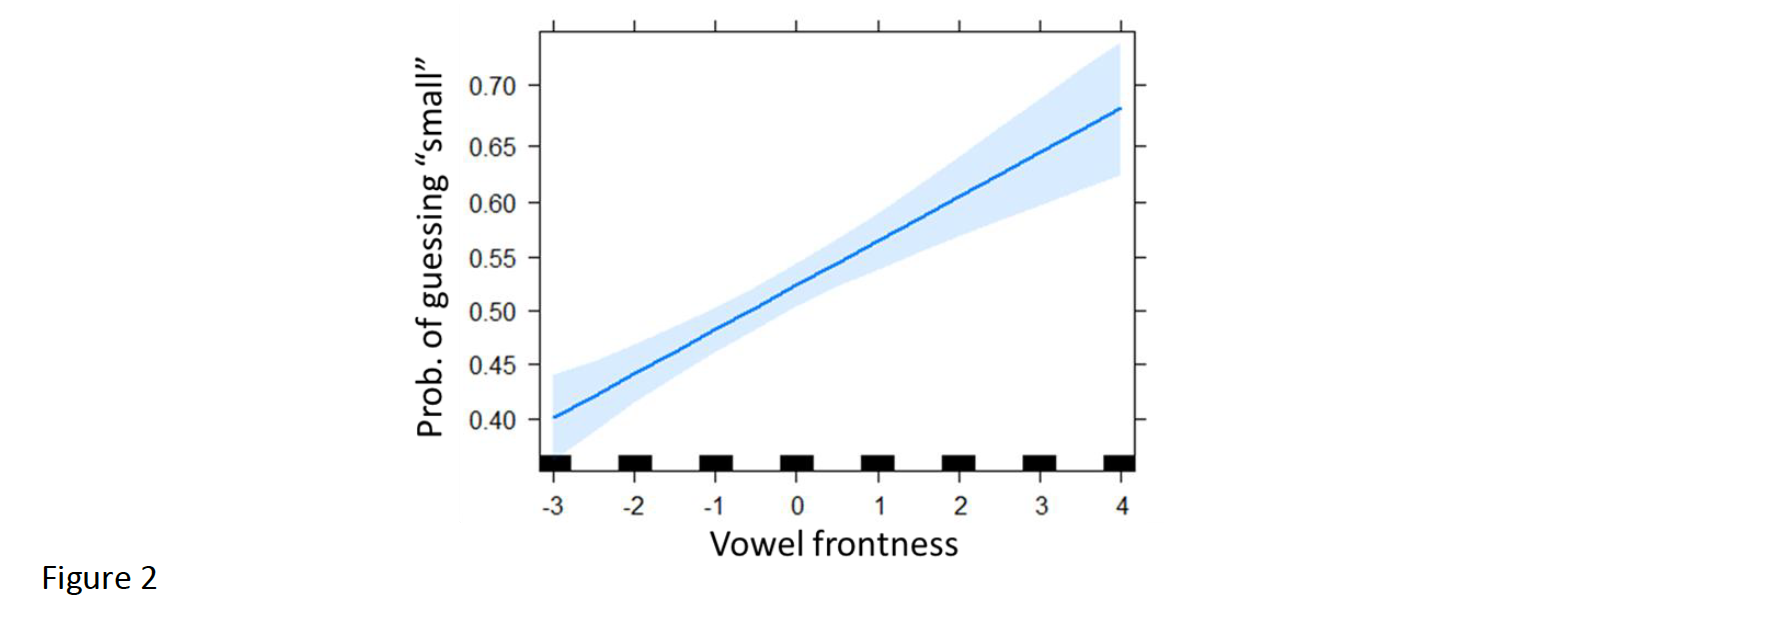 Vowel frontness plotted against probability of guessing "small"